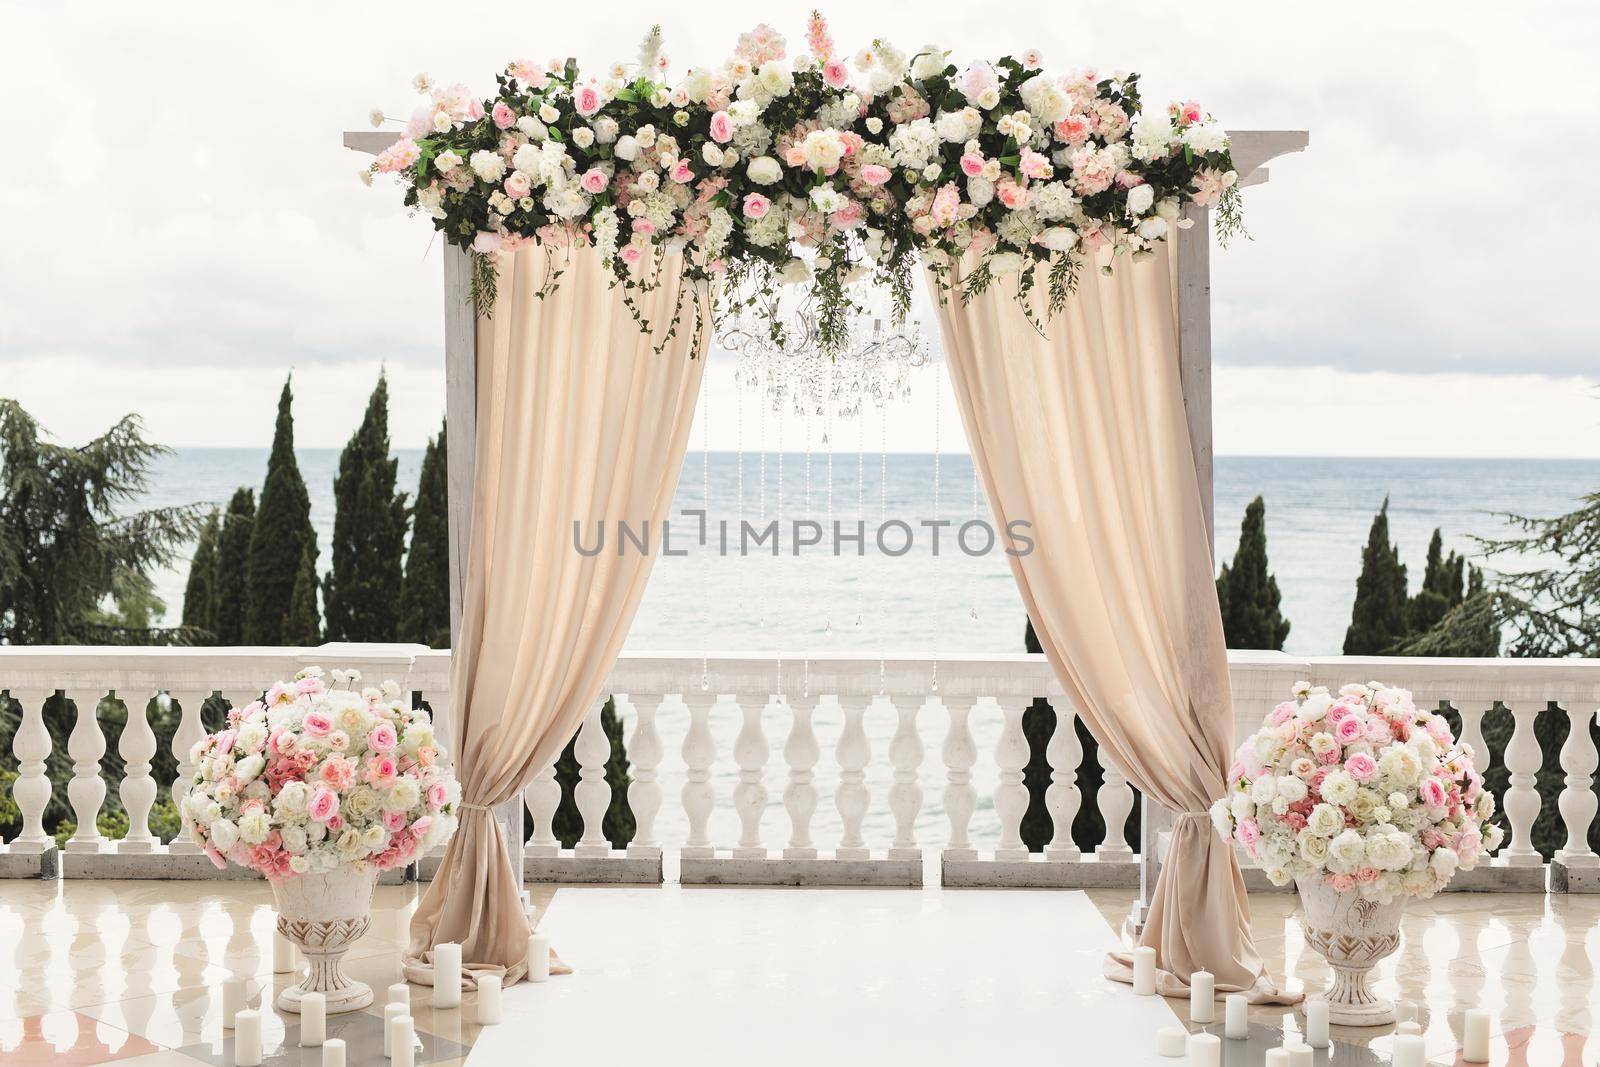 The wedding arch decorated with flowers stands in the luxurious area of the wedding ceremony by StudioPeace